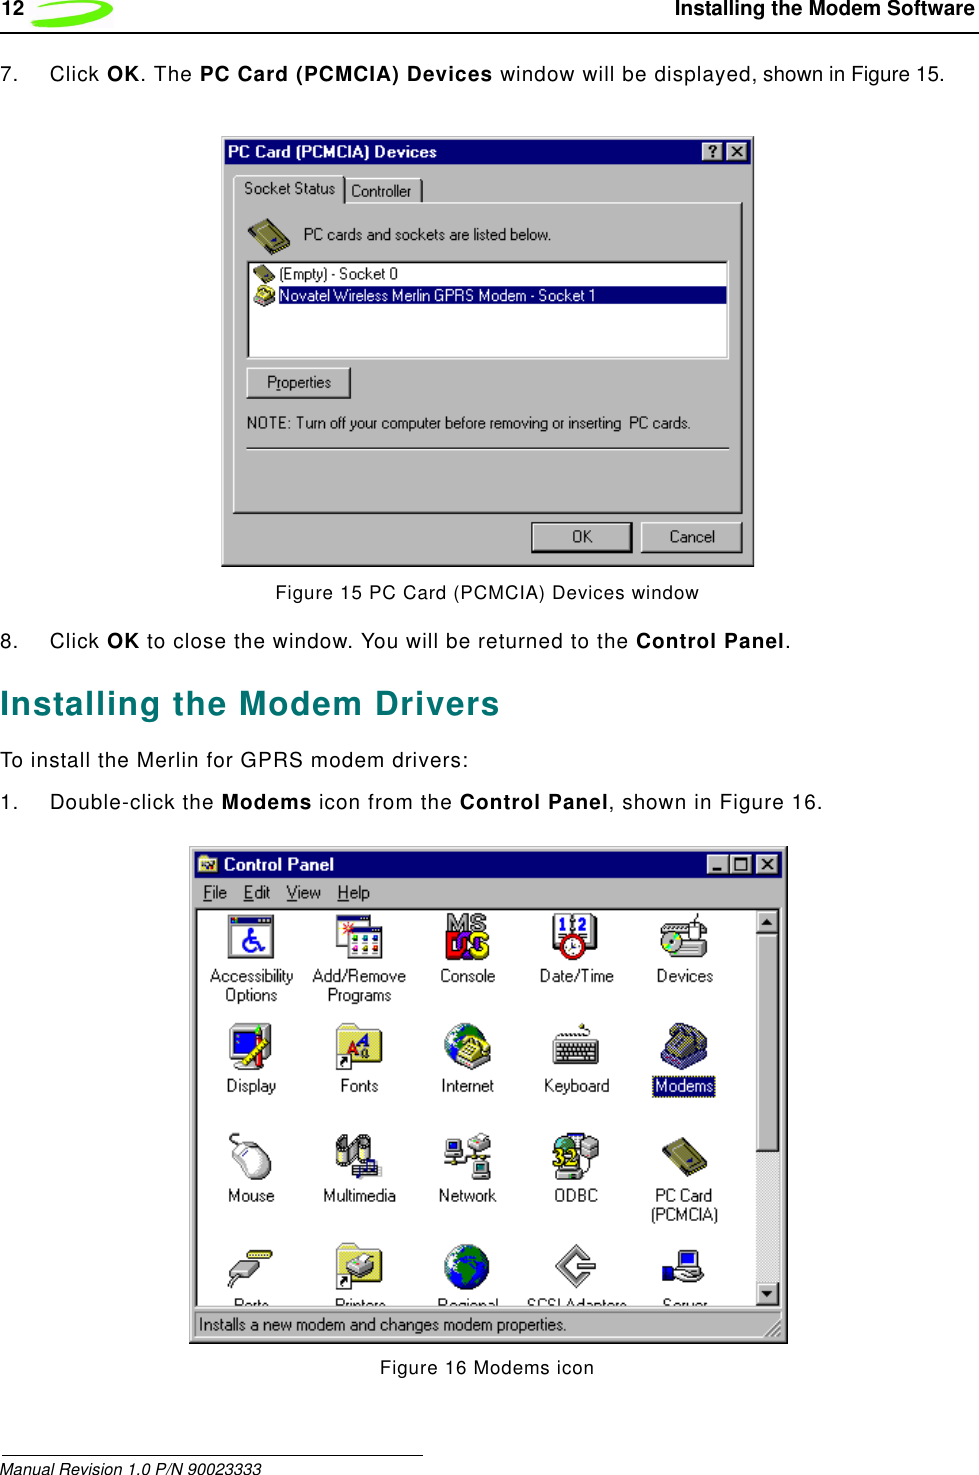 12  Installing the Modem SoftwareManual Revision 1.0 P/N 900233337. Click OK. The PC Card (PCMCIA) Devices window will be displayed, shown in Figure 15.Figure 15 PC Card (PCMCIA) Devices window8. Click OK to close the window. You will be returned to the Control Panel.Installing the Modem DriversTo install the Merlin for GPRS modem drivers:1. Double-click the Modems icon from the Control Panel, shown in Figure 16. Figure 16 Modems icon